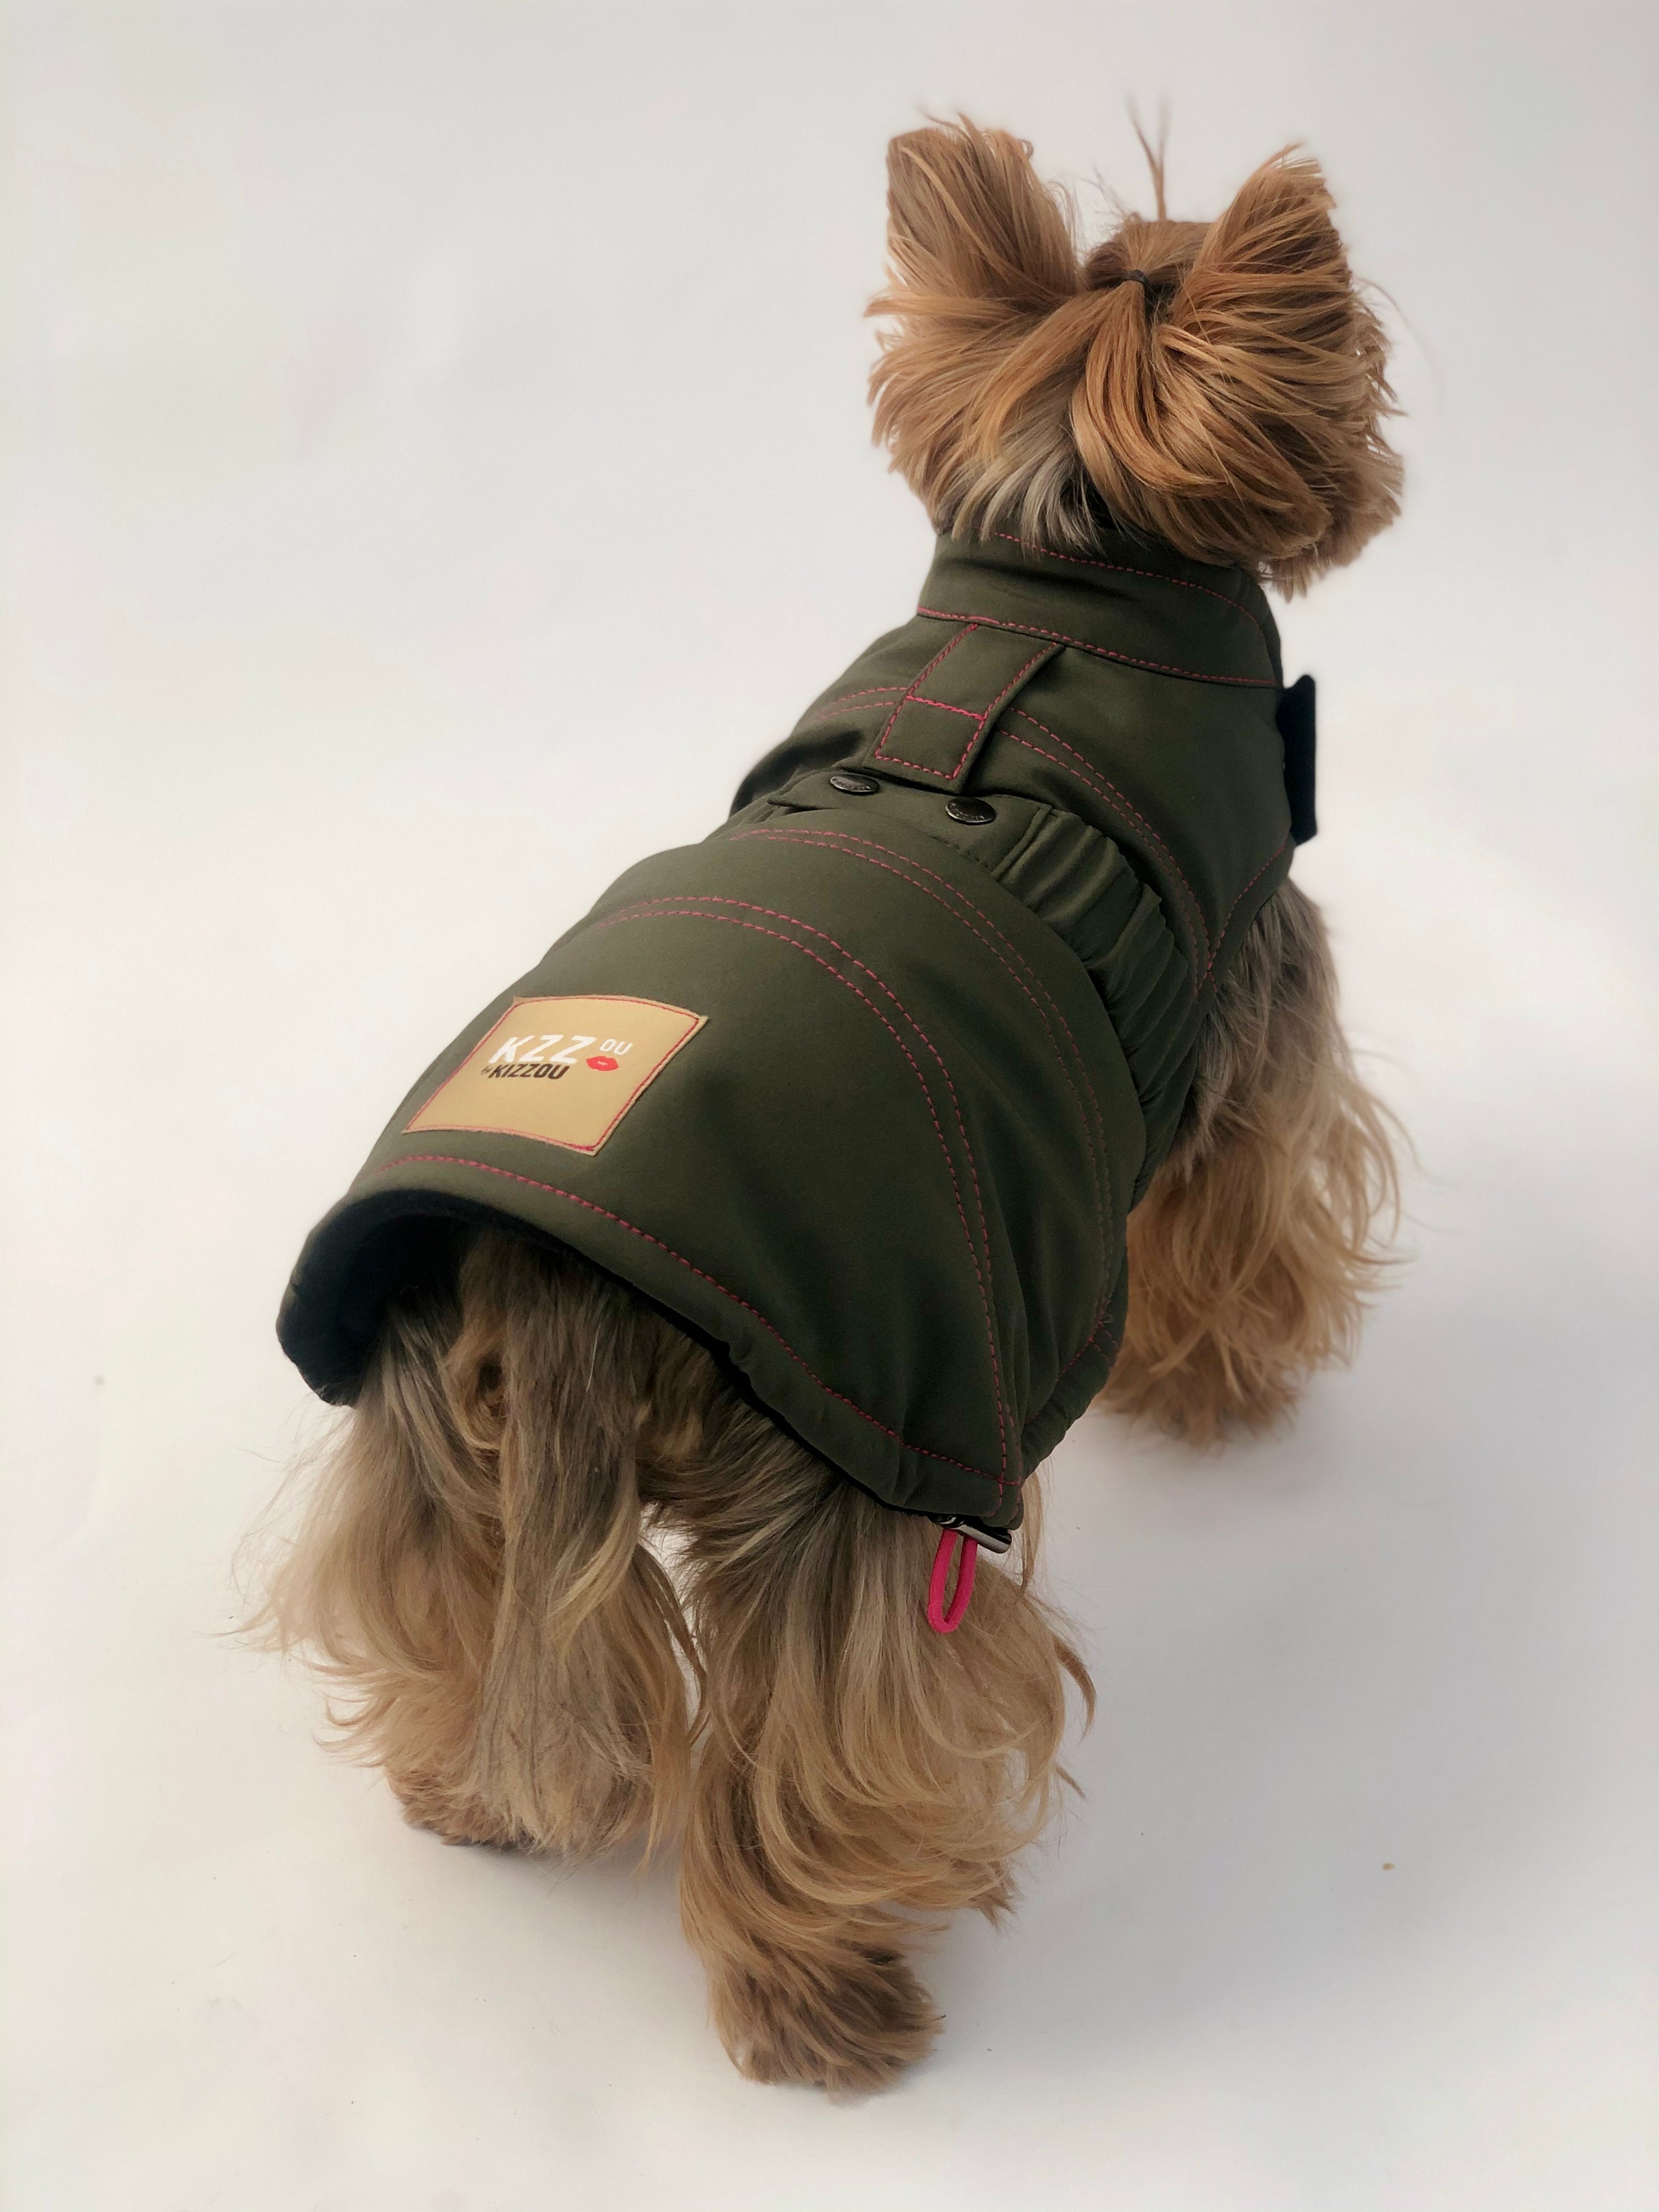 Small size  dog wearing a Kizzou winter jacket is adjustable to fit different dog body shapes, easy to put on and made of quality materials.